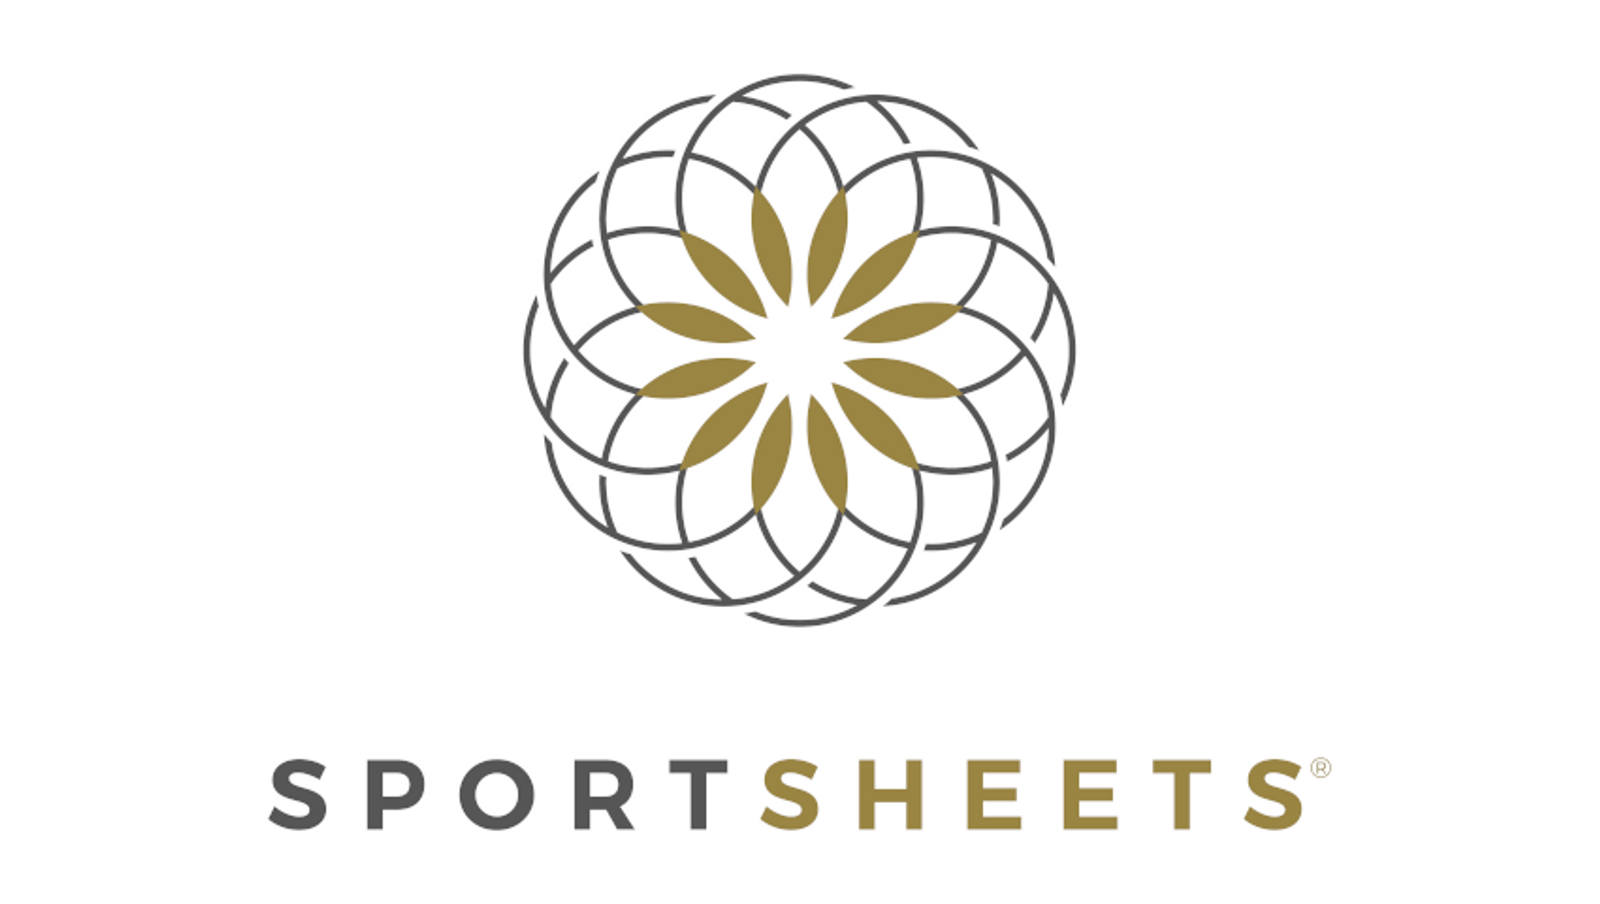 Sportsheets Offers Style Guides for Reseller Support